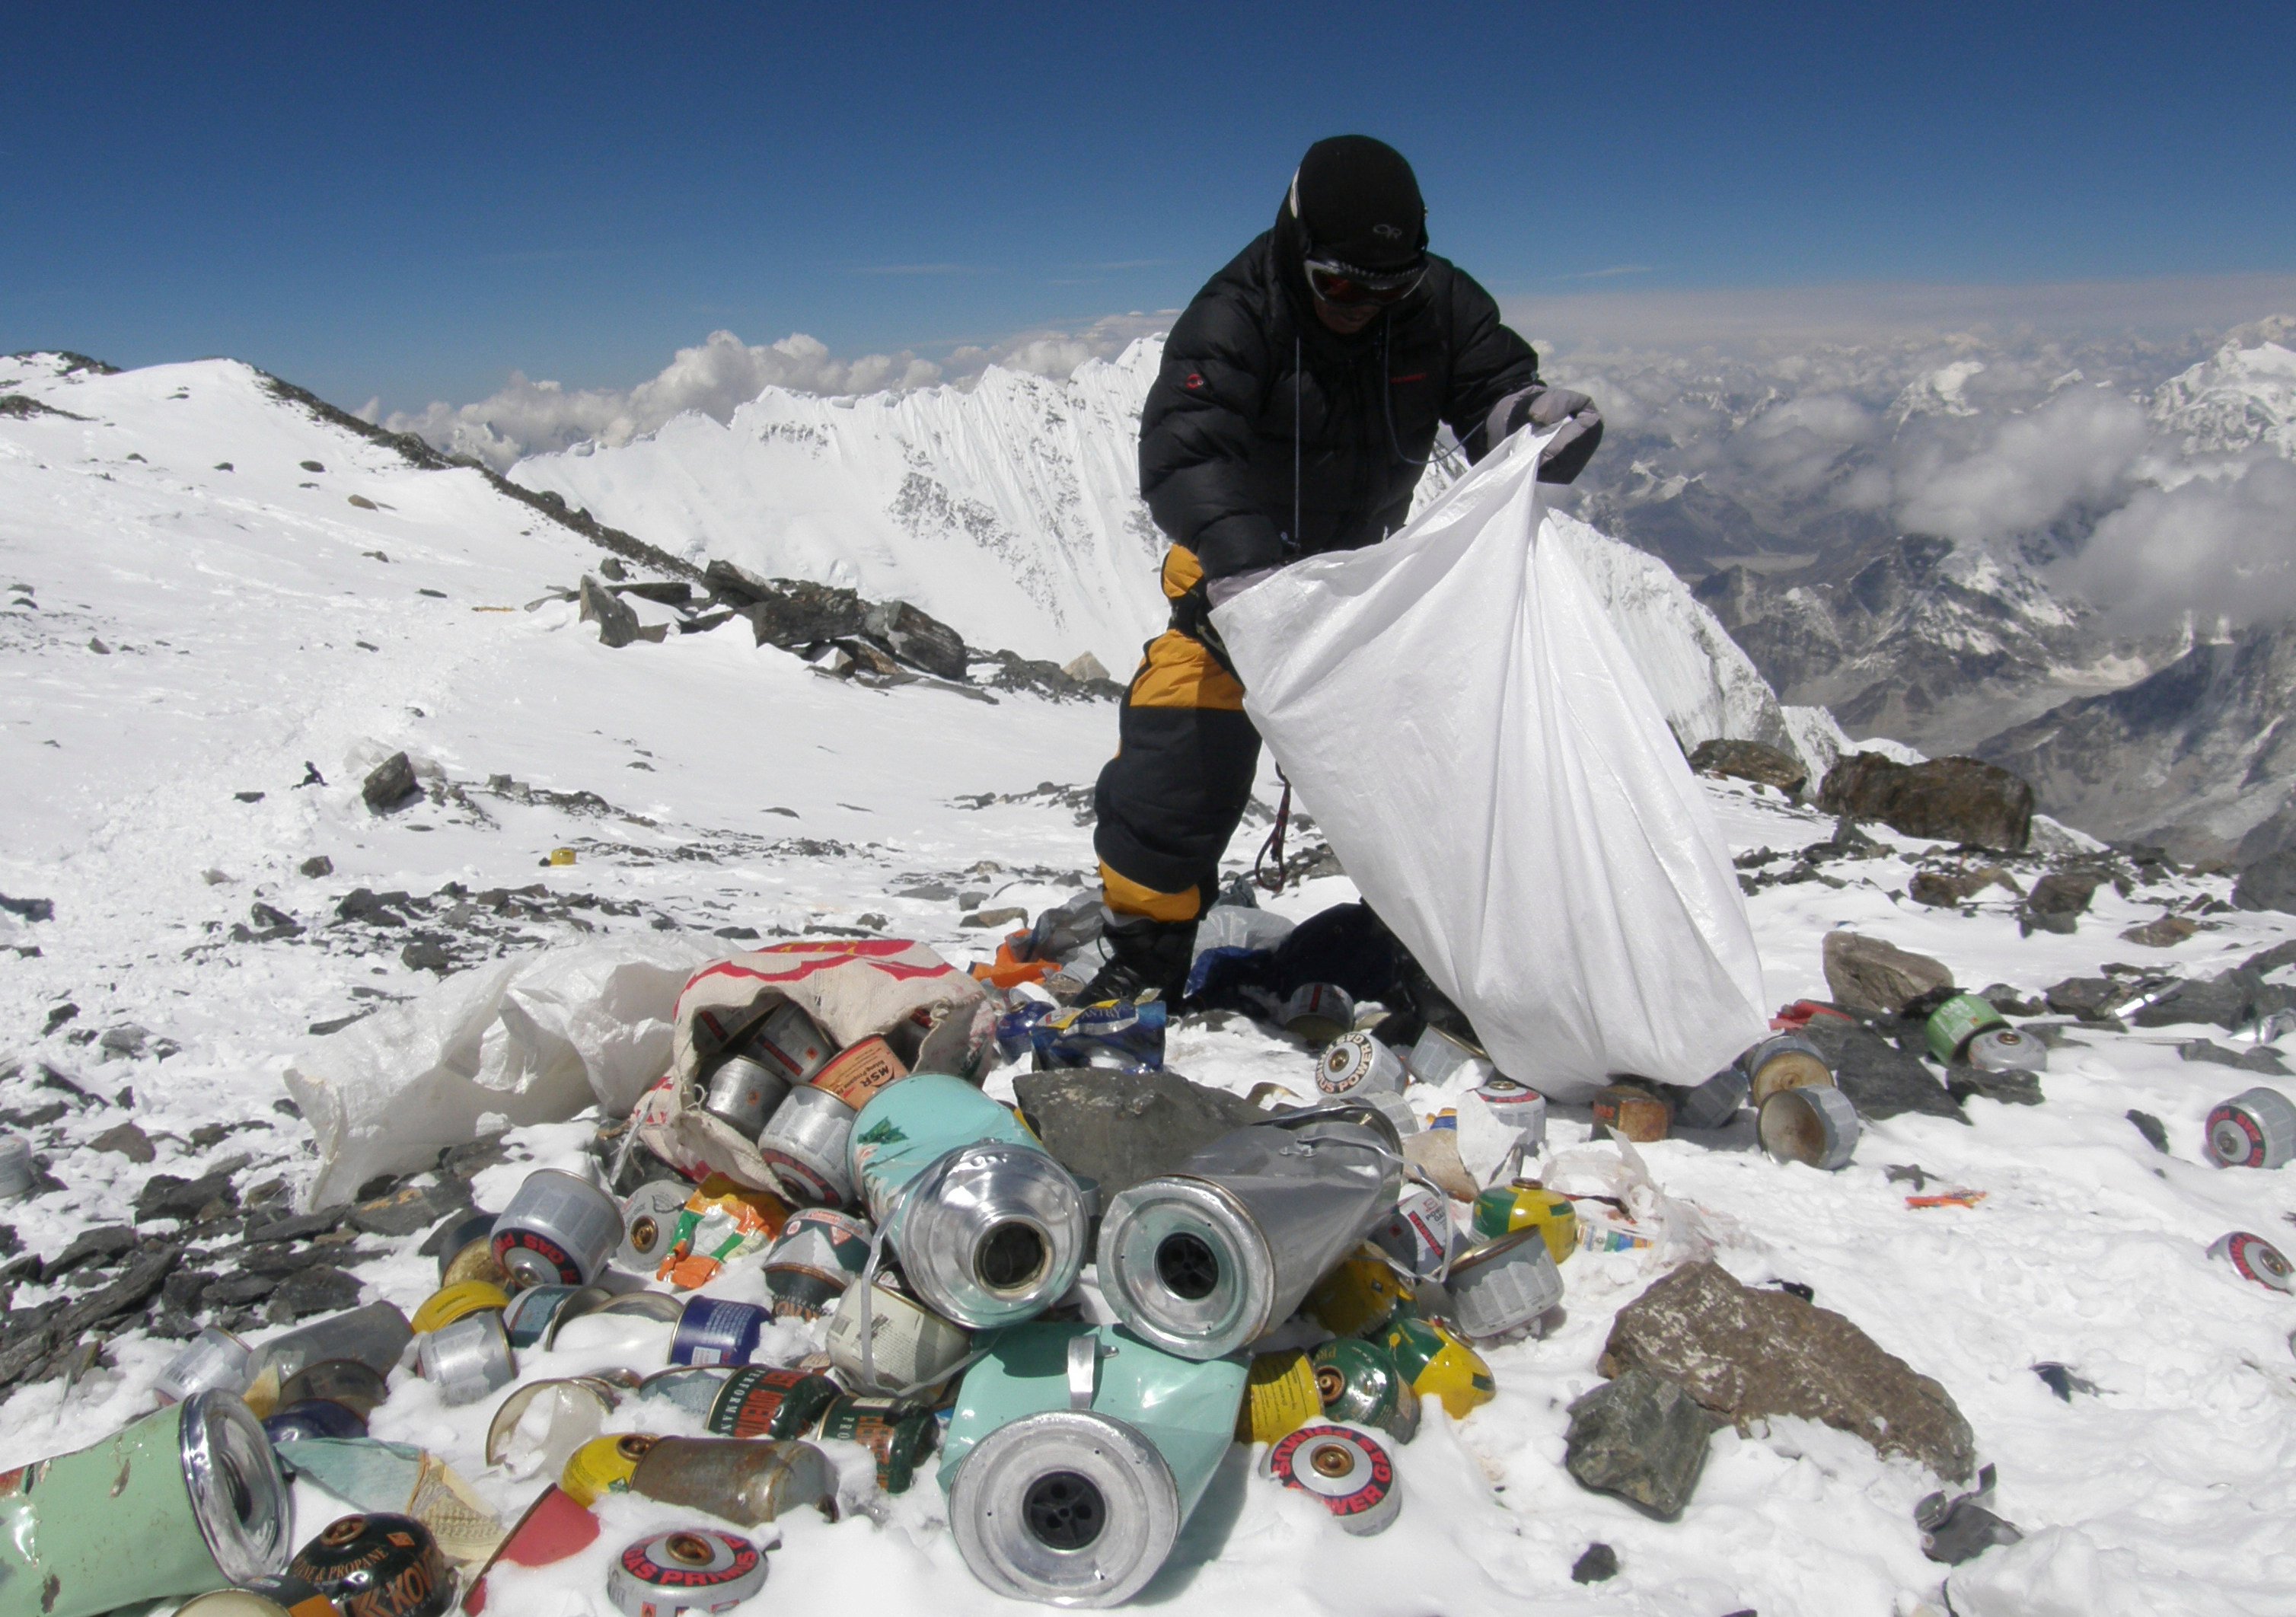 A Nepalese sherpa collecting garbage, left by climbers, at an altitude of 8,000 metres during the Everest clean-up expedition at Mount Everest. Photo: AFP